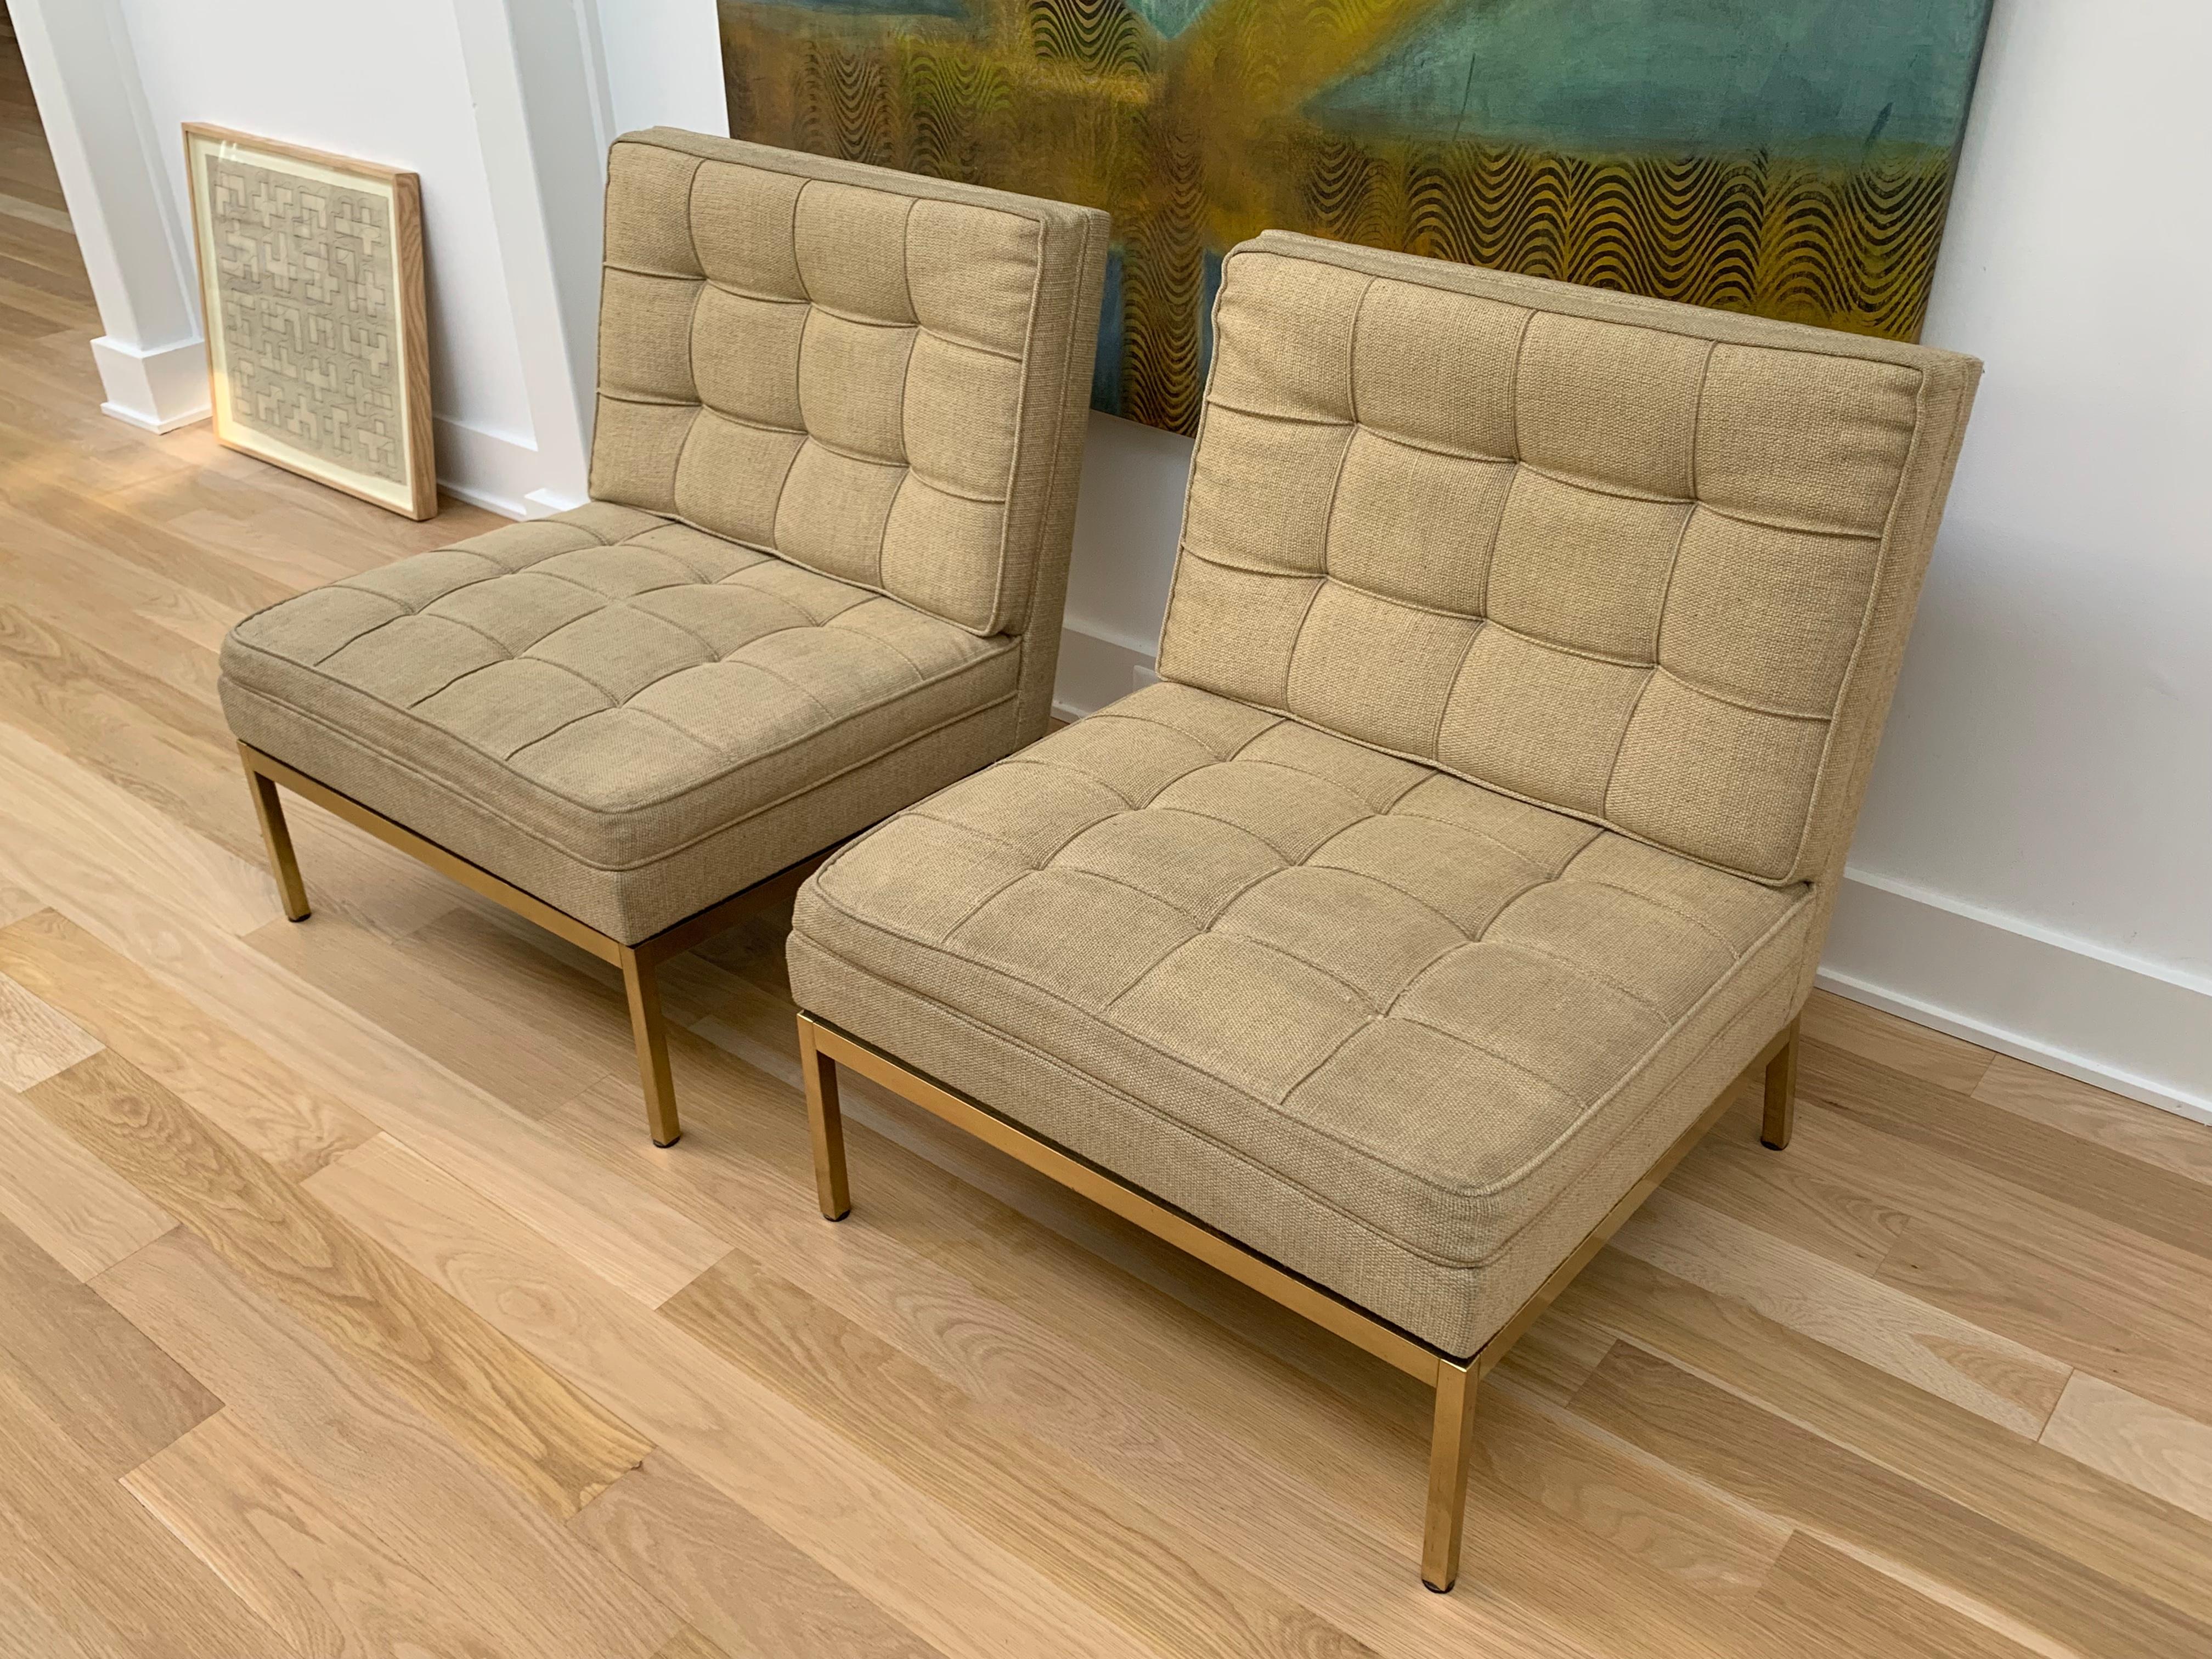 Pair of Knoll Lounge Chairs In Good Condition For Sale In Washington, DC